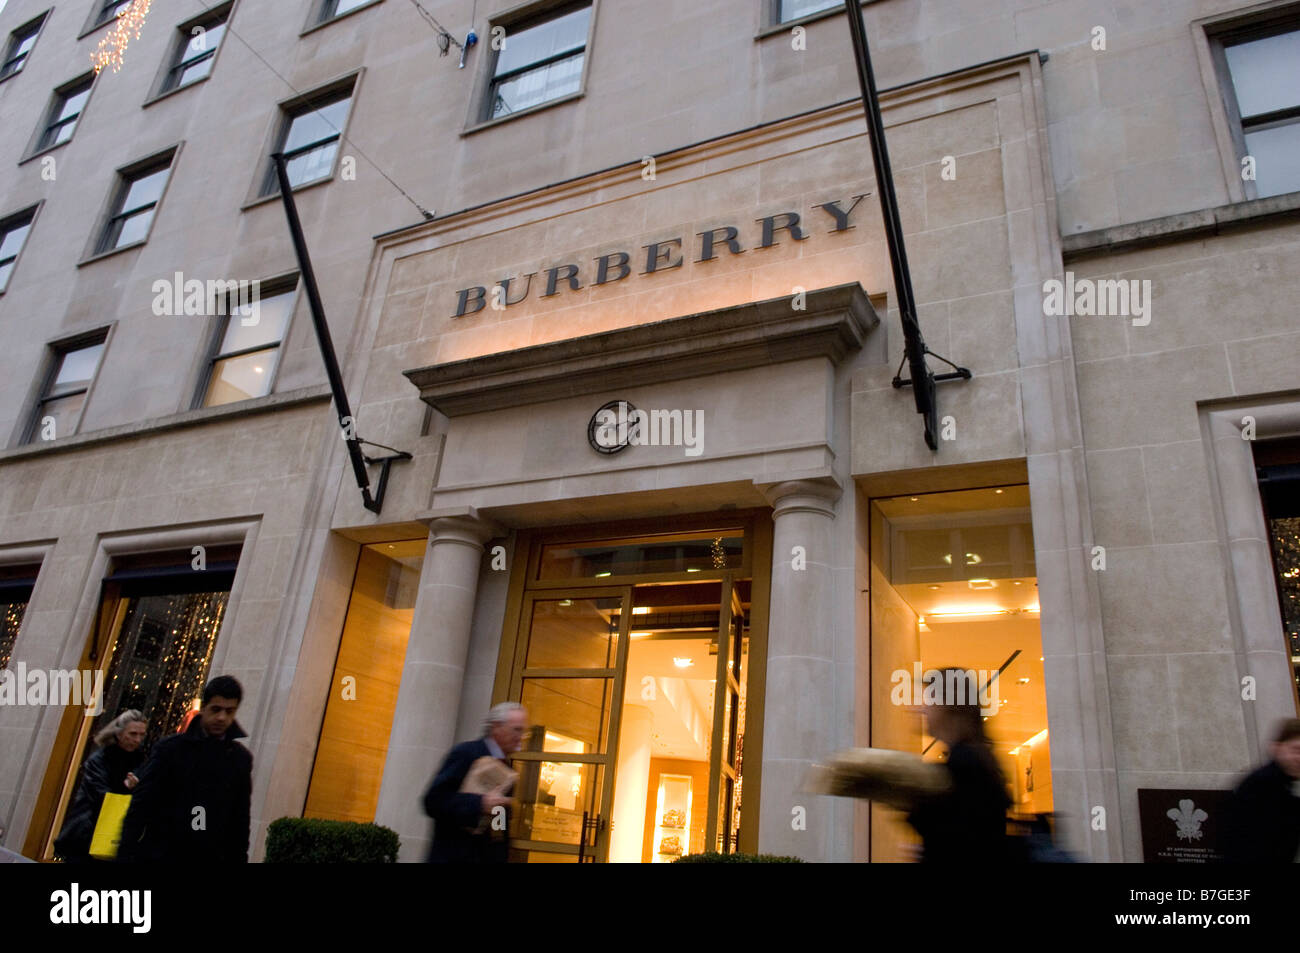 Burberry Shop Haymarket High Resolution Stock Photography and Images - Alamy